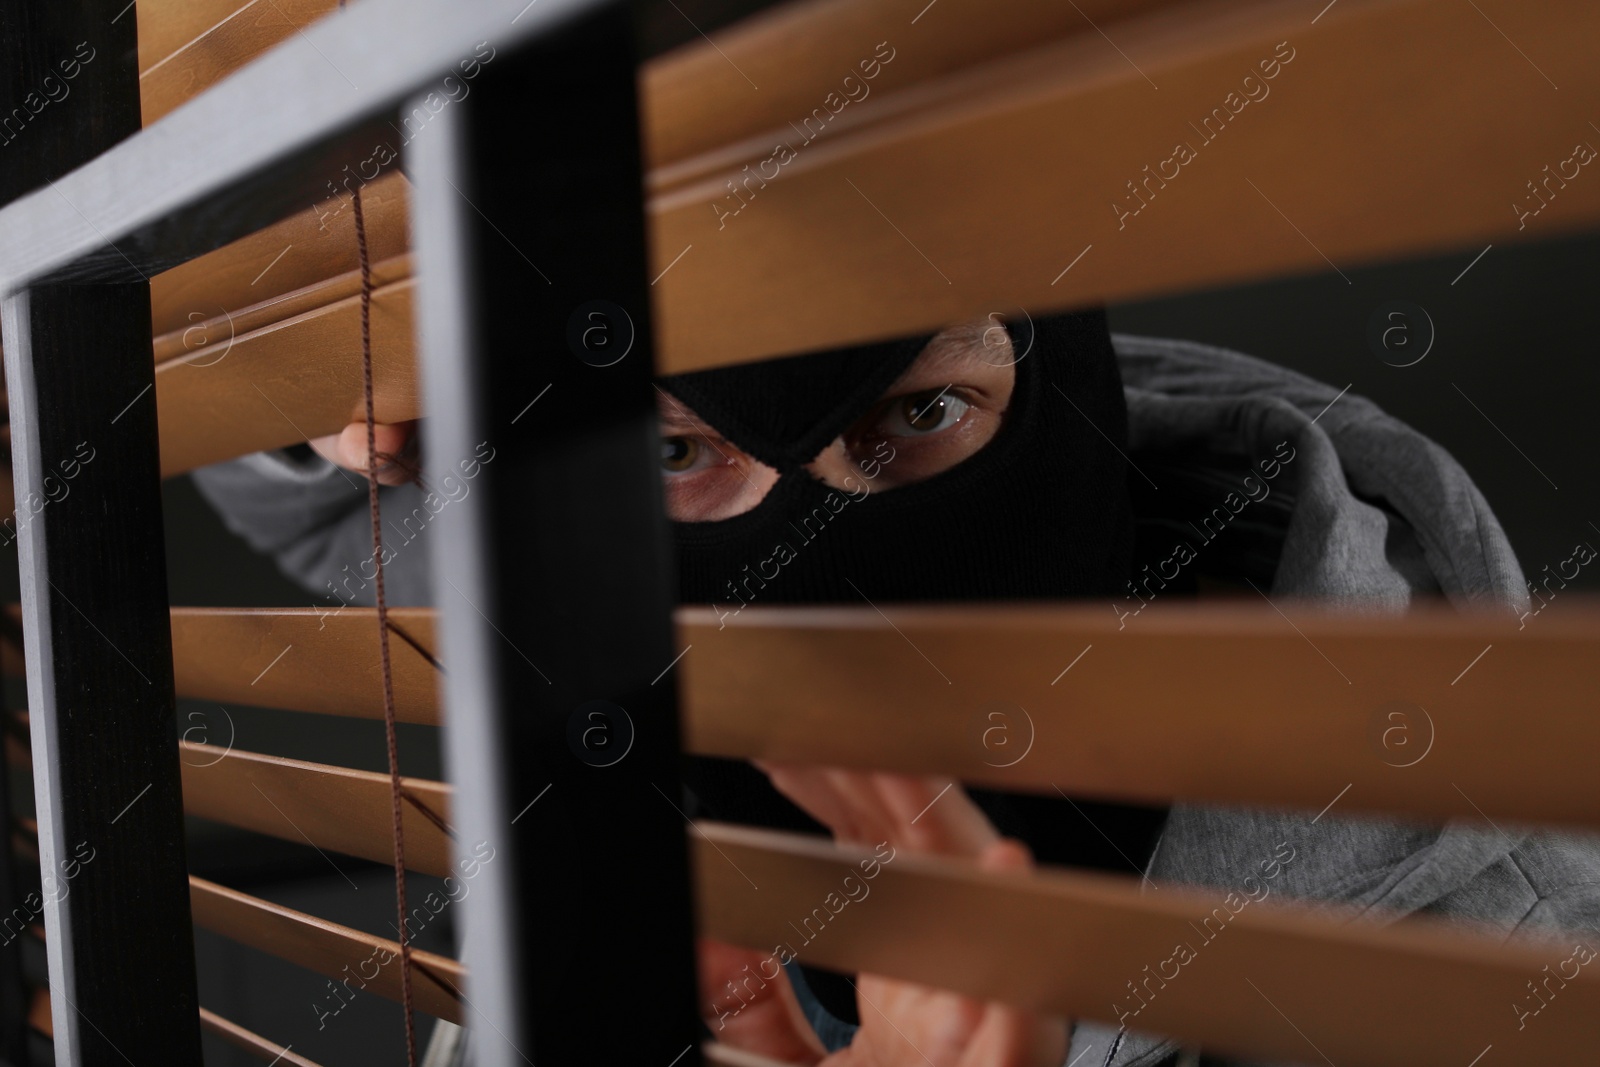 Photo of Masked man spying through window blinds indoors. Criminal offence